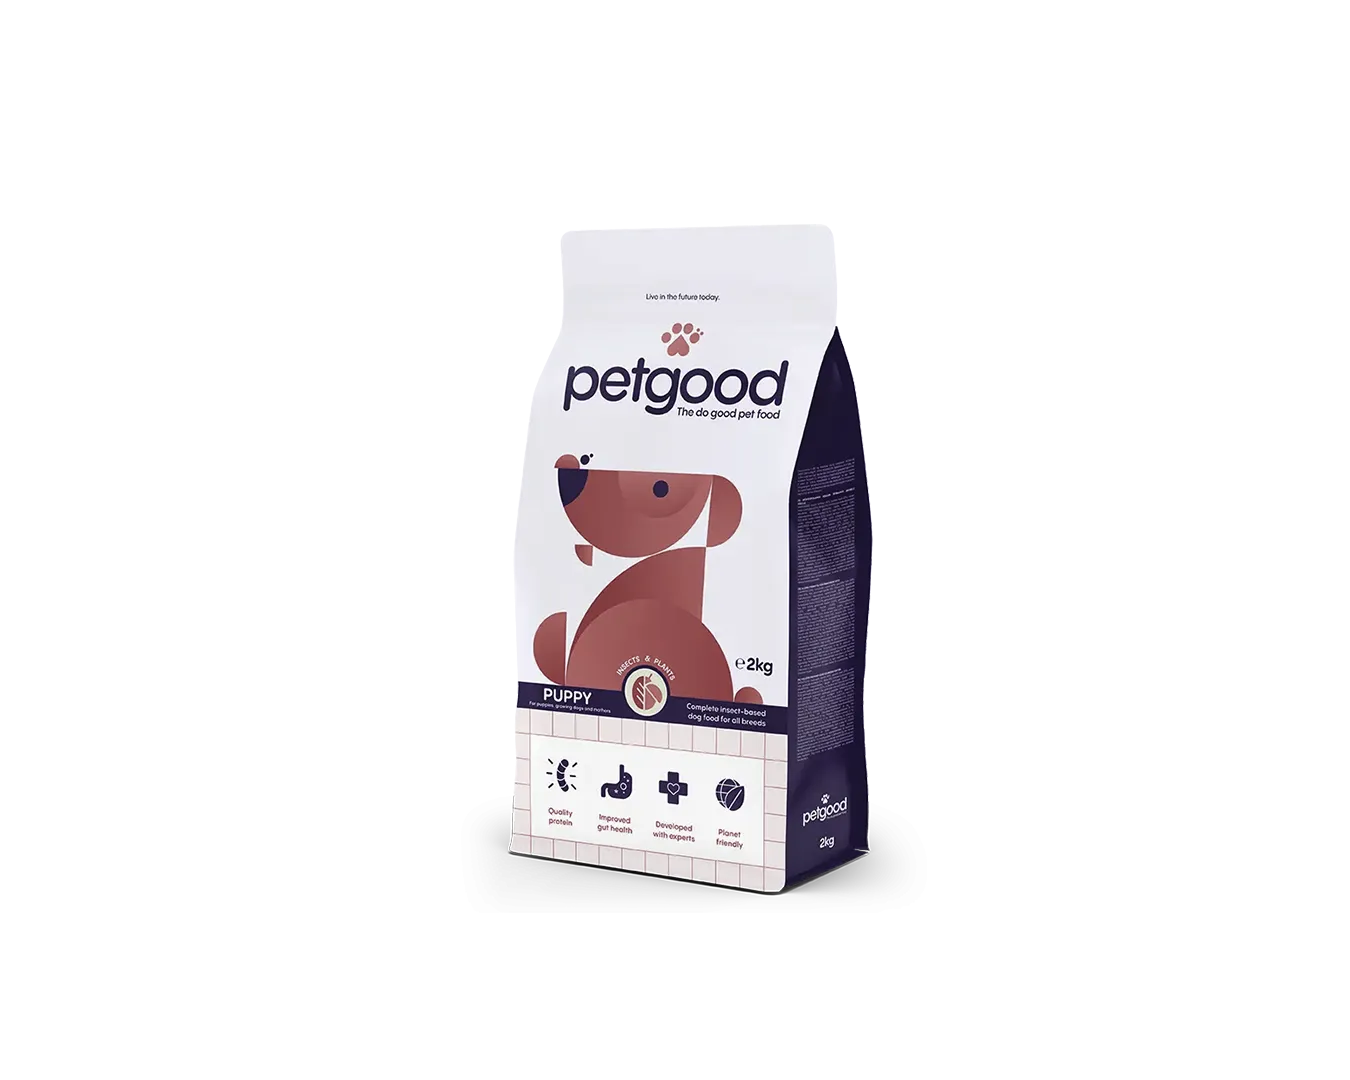 https://a.storyblok.com/f/236174/1350x1080/b22b44f628/insect-based-dry-puppy-food-2kg.webp